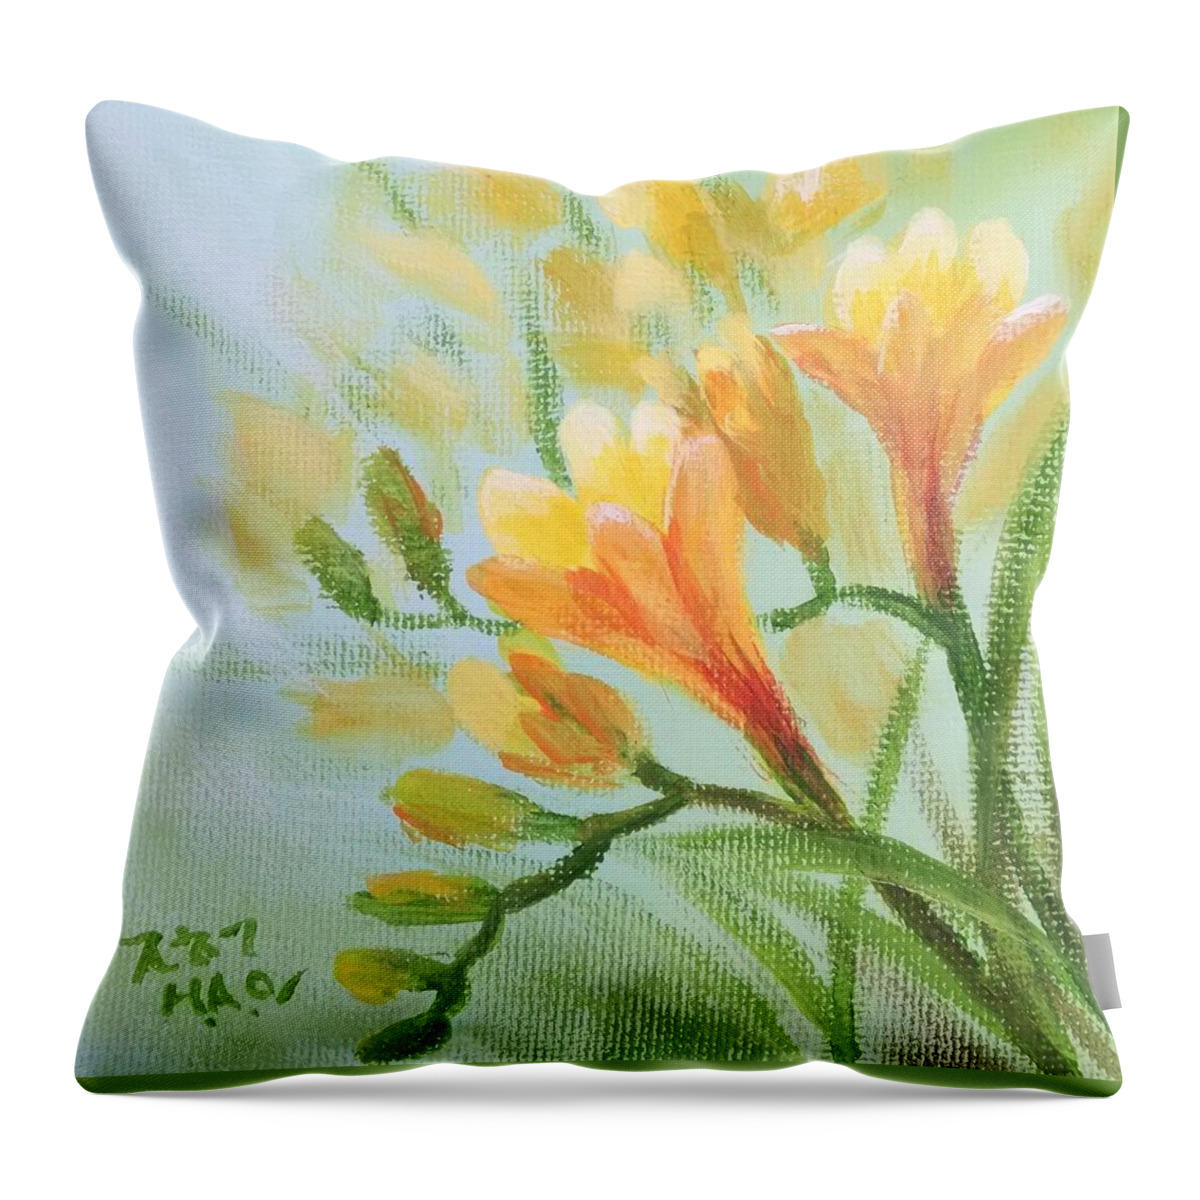 Freesia Throw Pillow featuring the painting Freesia by Helian Cornwell